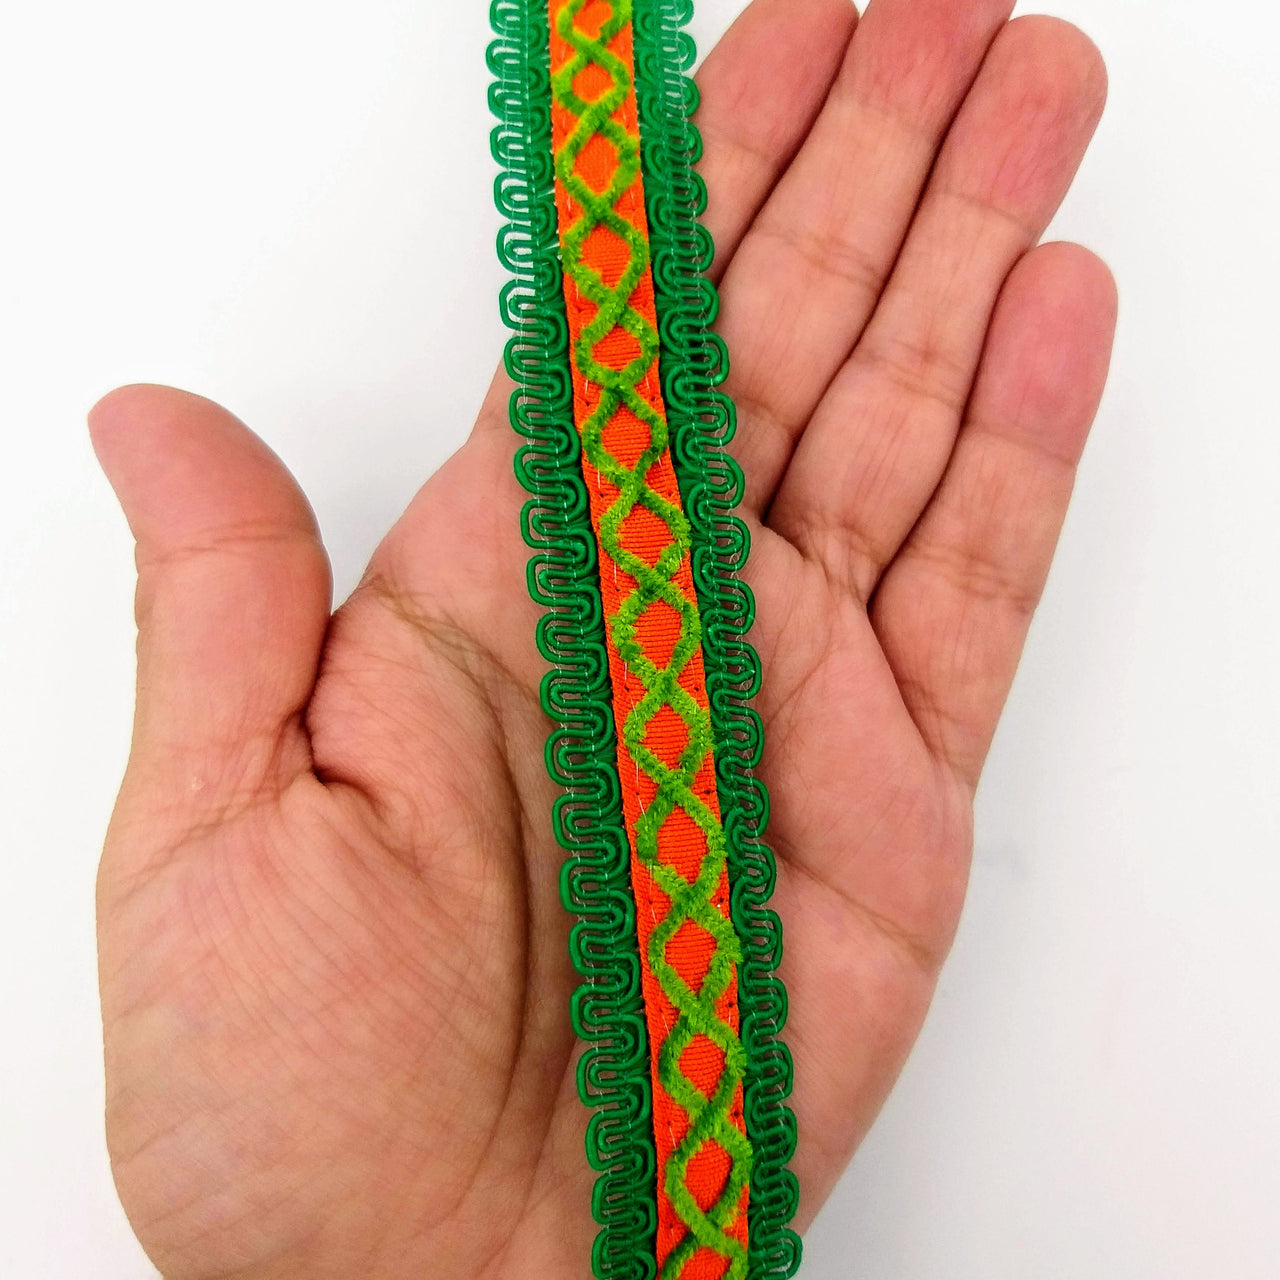 Orange Cotton Fabric Lace Trim with Green Thread Embroidery, Trim By 3 Yards, Craft Decorative Ribbon